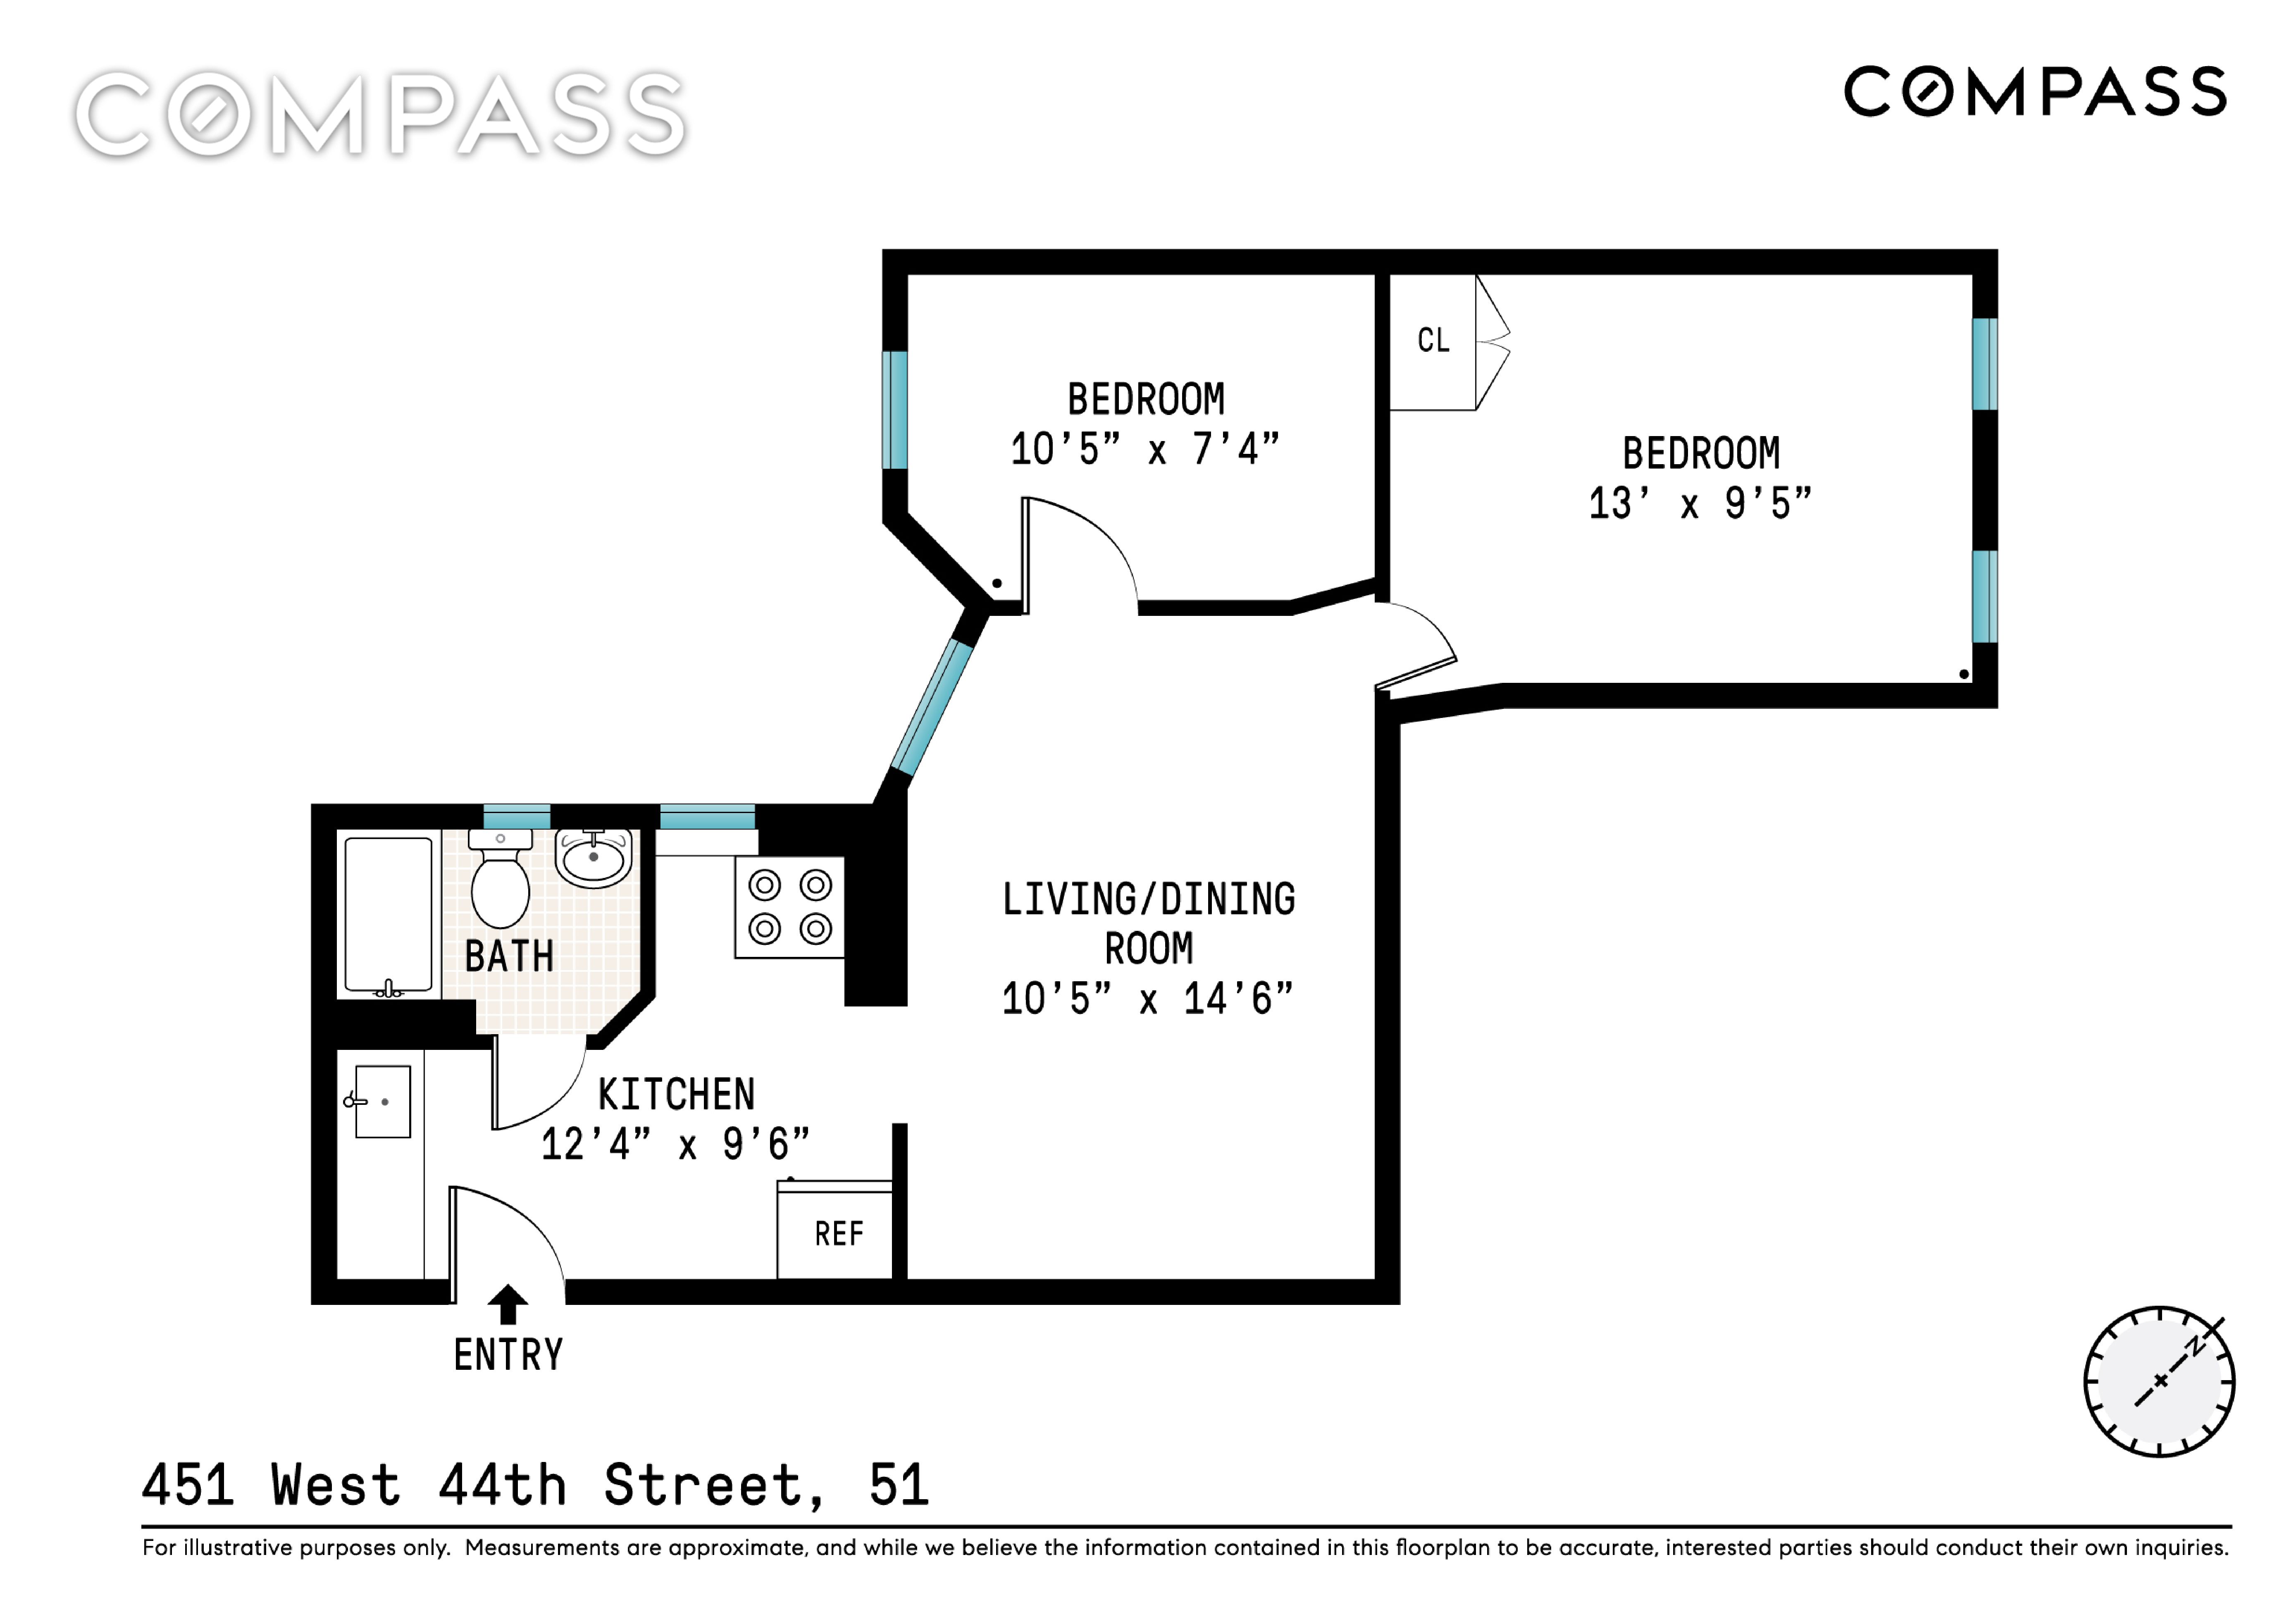 451 West 44th Street 51, Hell S Kitchen, Midtown West, NYC - 2 Bedrooms  
1 Bathrooms  
1 Rooms - 